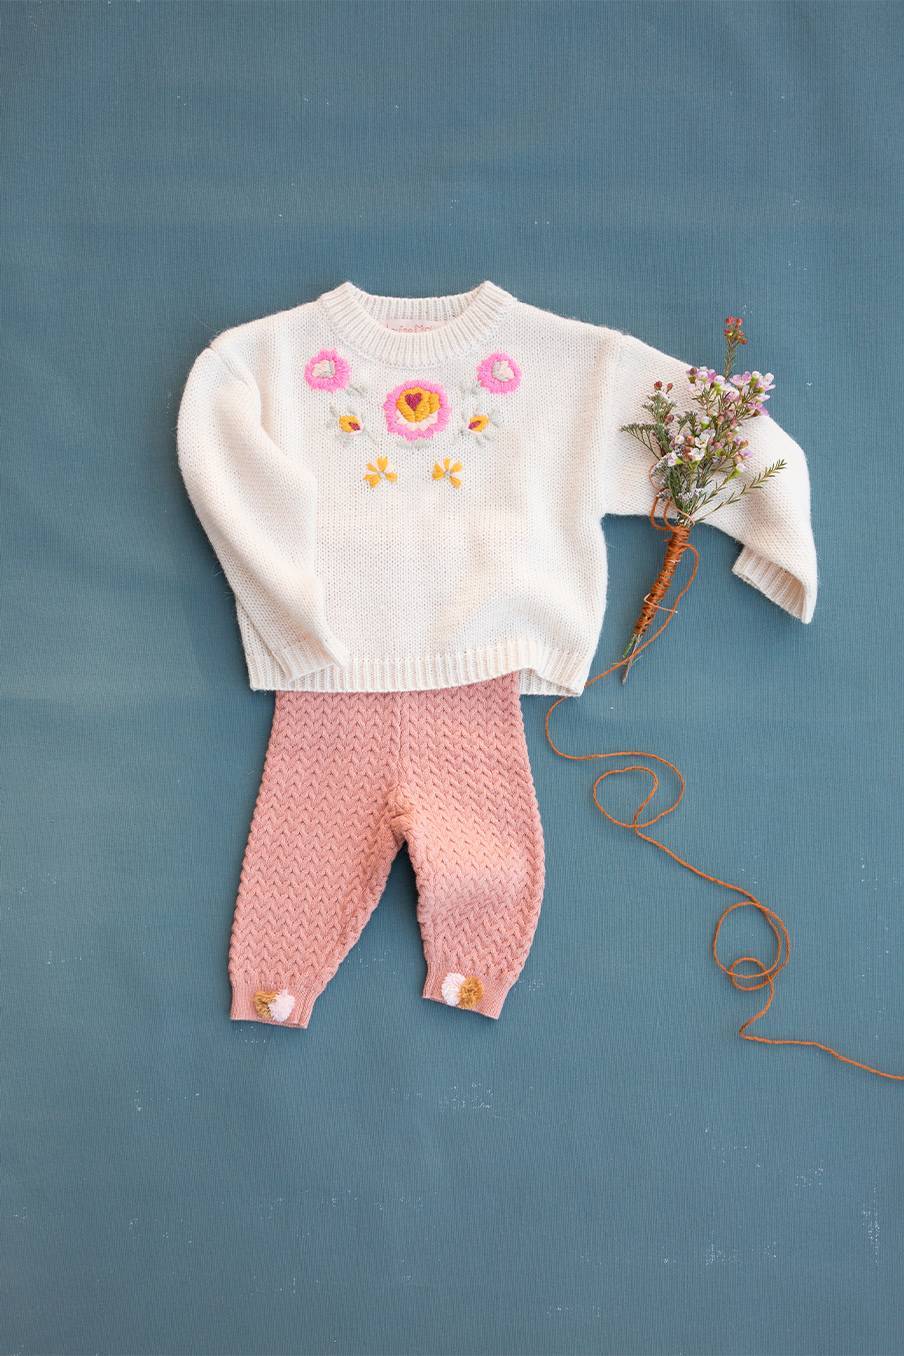 Bohemian Chic Vintage Jumper For Baby Girl Louise Misha